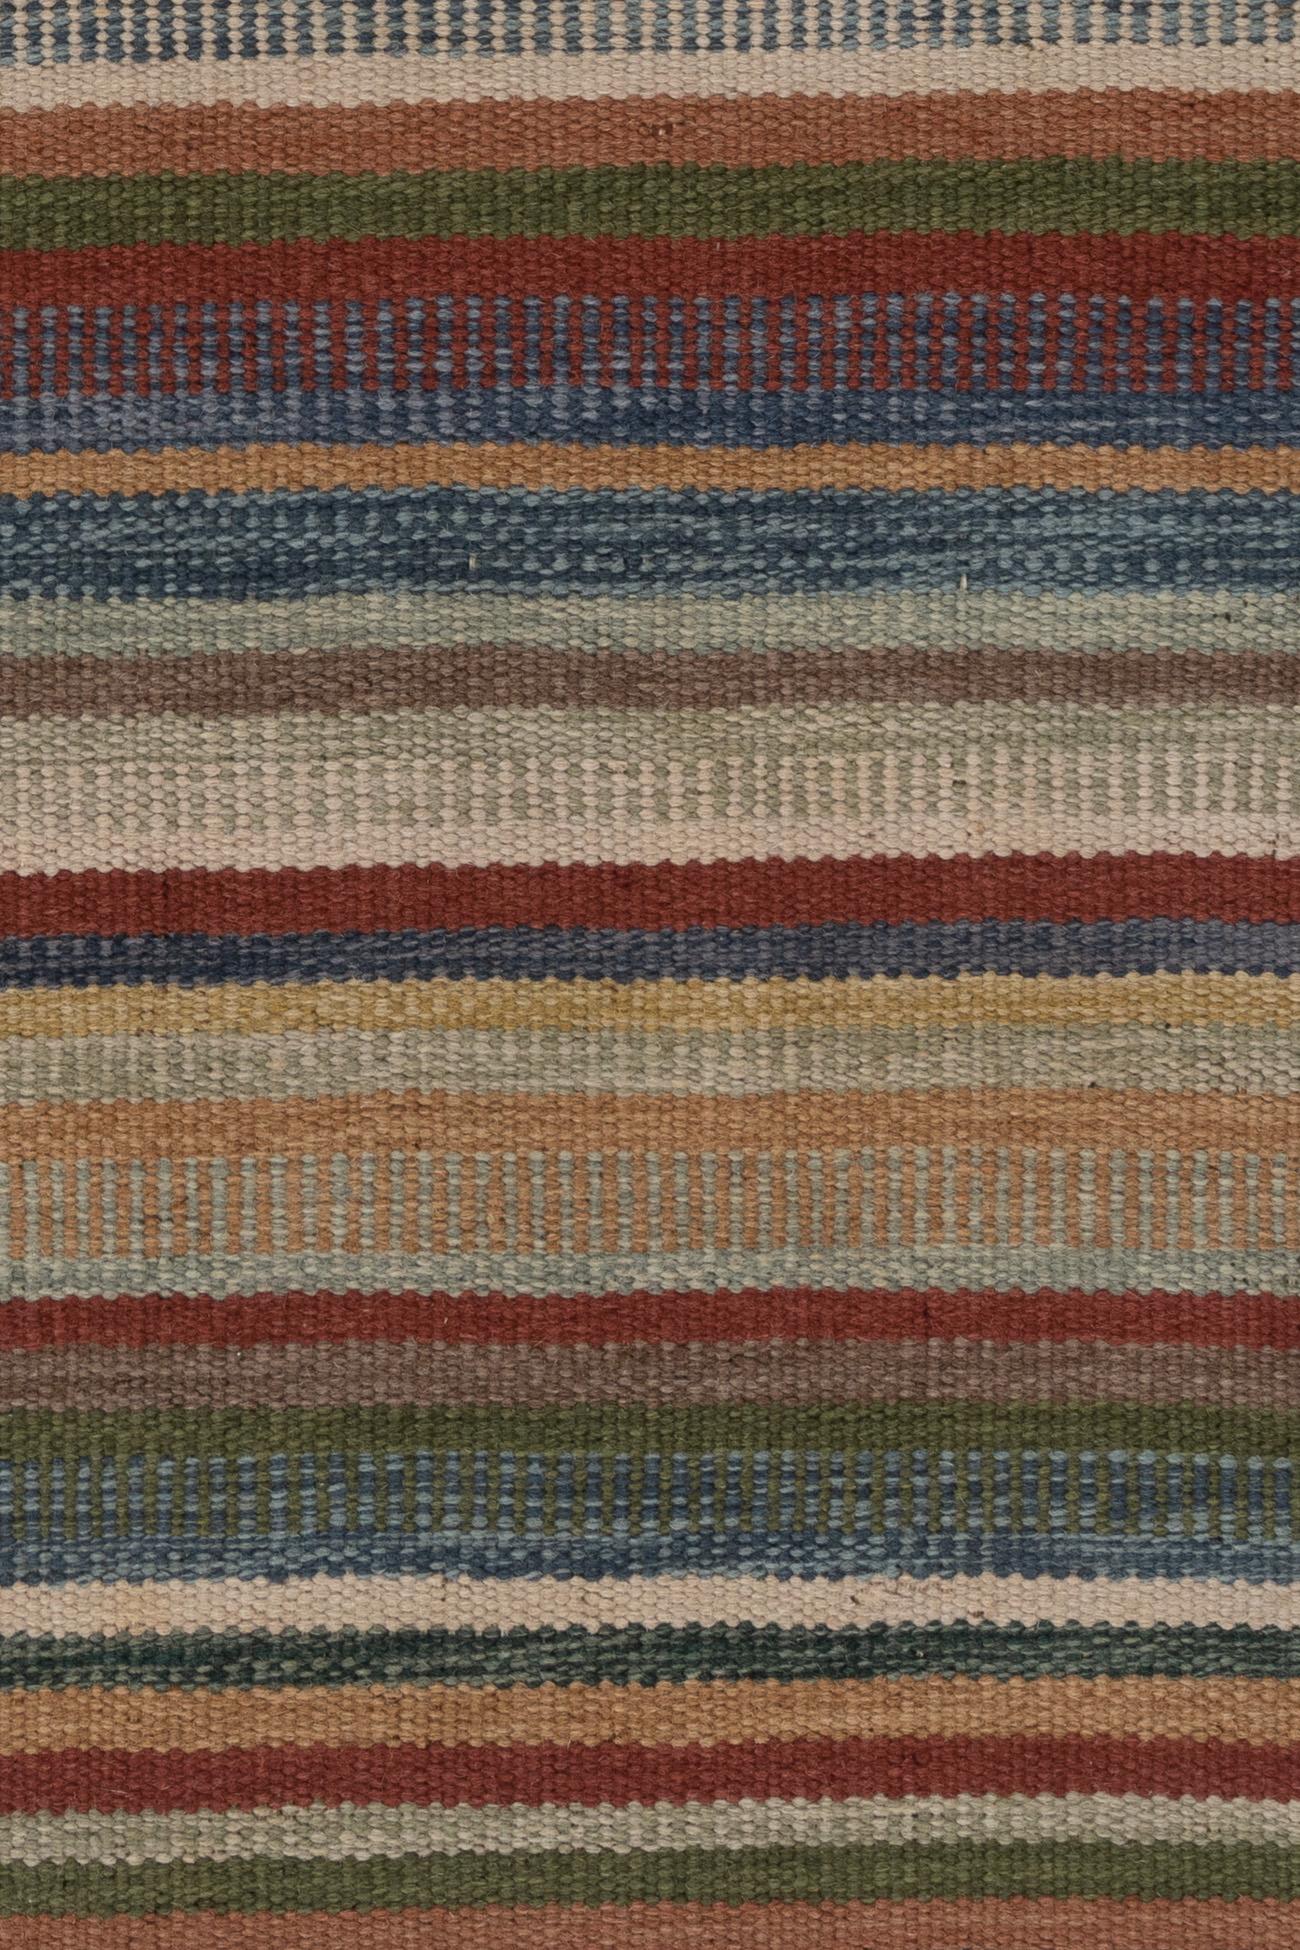 Vintage Swedish Scandinavian Kilim rug 4' x 6'3. A wonderful mid-century circa 1960 Swedish flat weave rug with a wonderful collection of colors woven into the design. Colors: brick/blues/greens/grays/ivory/taupe.